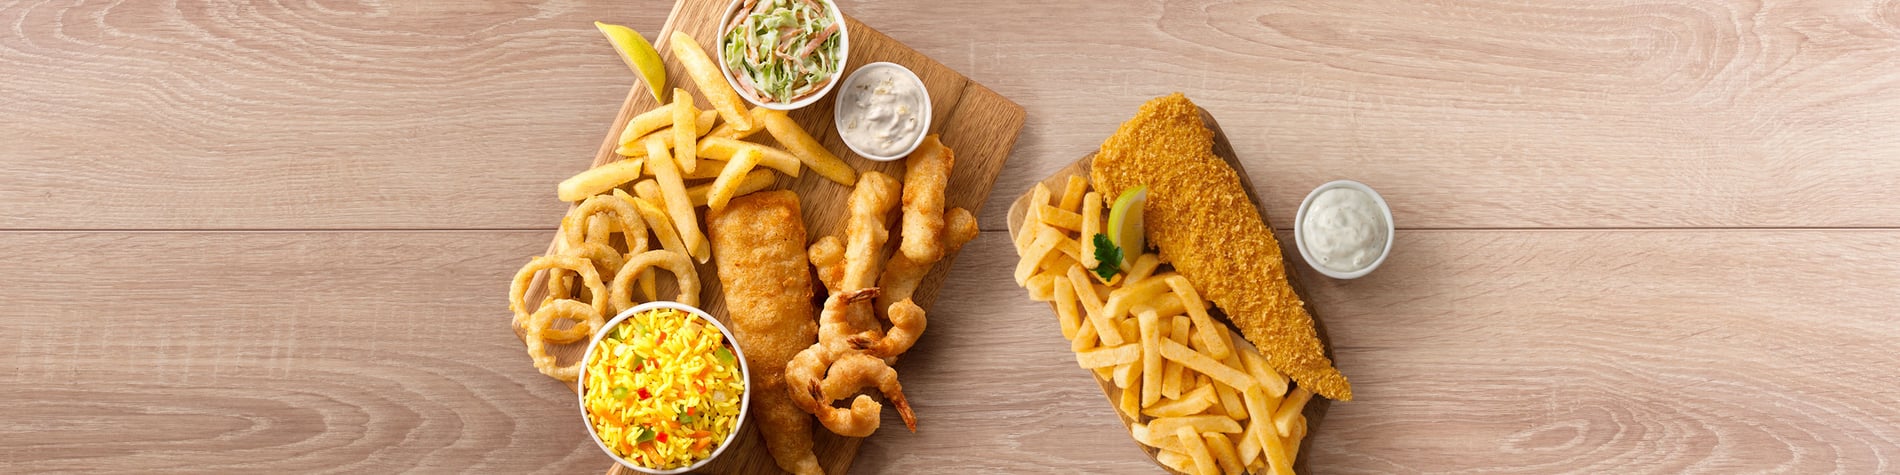 Seafood meals from Fishaways Gateway including a Crunchy Fish and Chips meal and a seafood Platter for One with hake, calamari, prawns, chips, onion rings, and coleslaw.